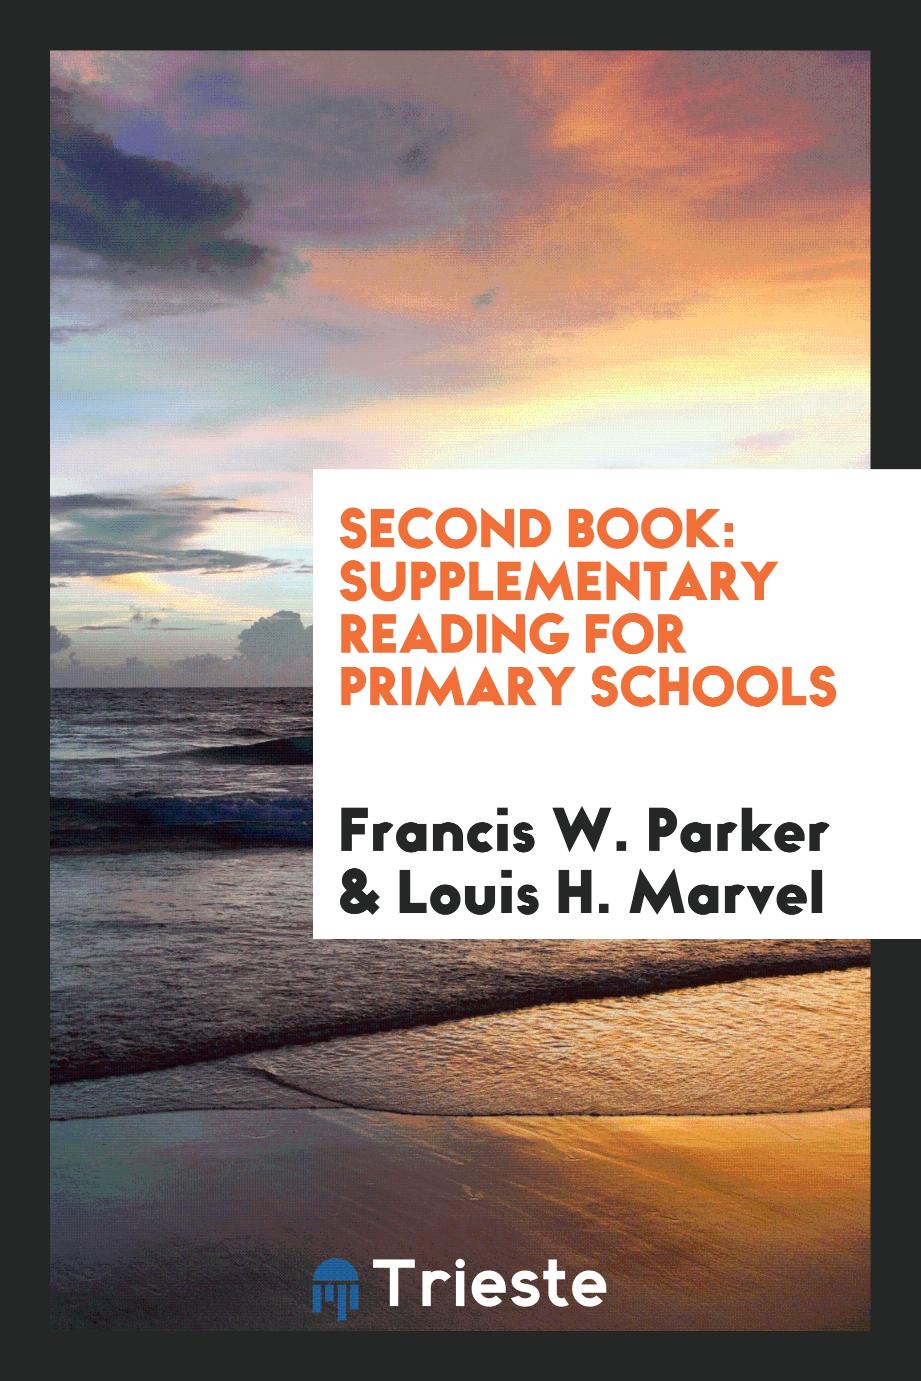 Second Book: Supplementary Reading for Primary Schools